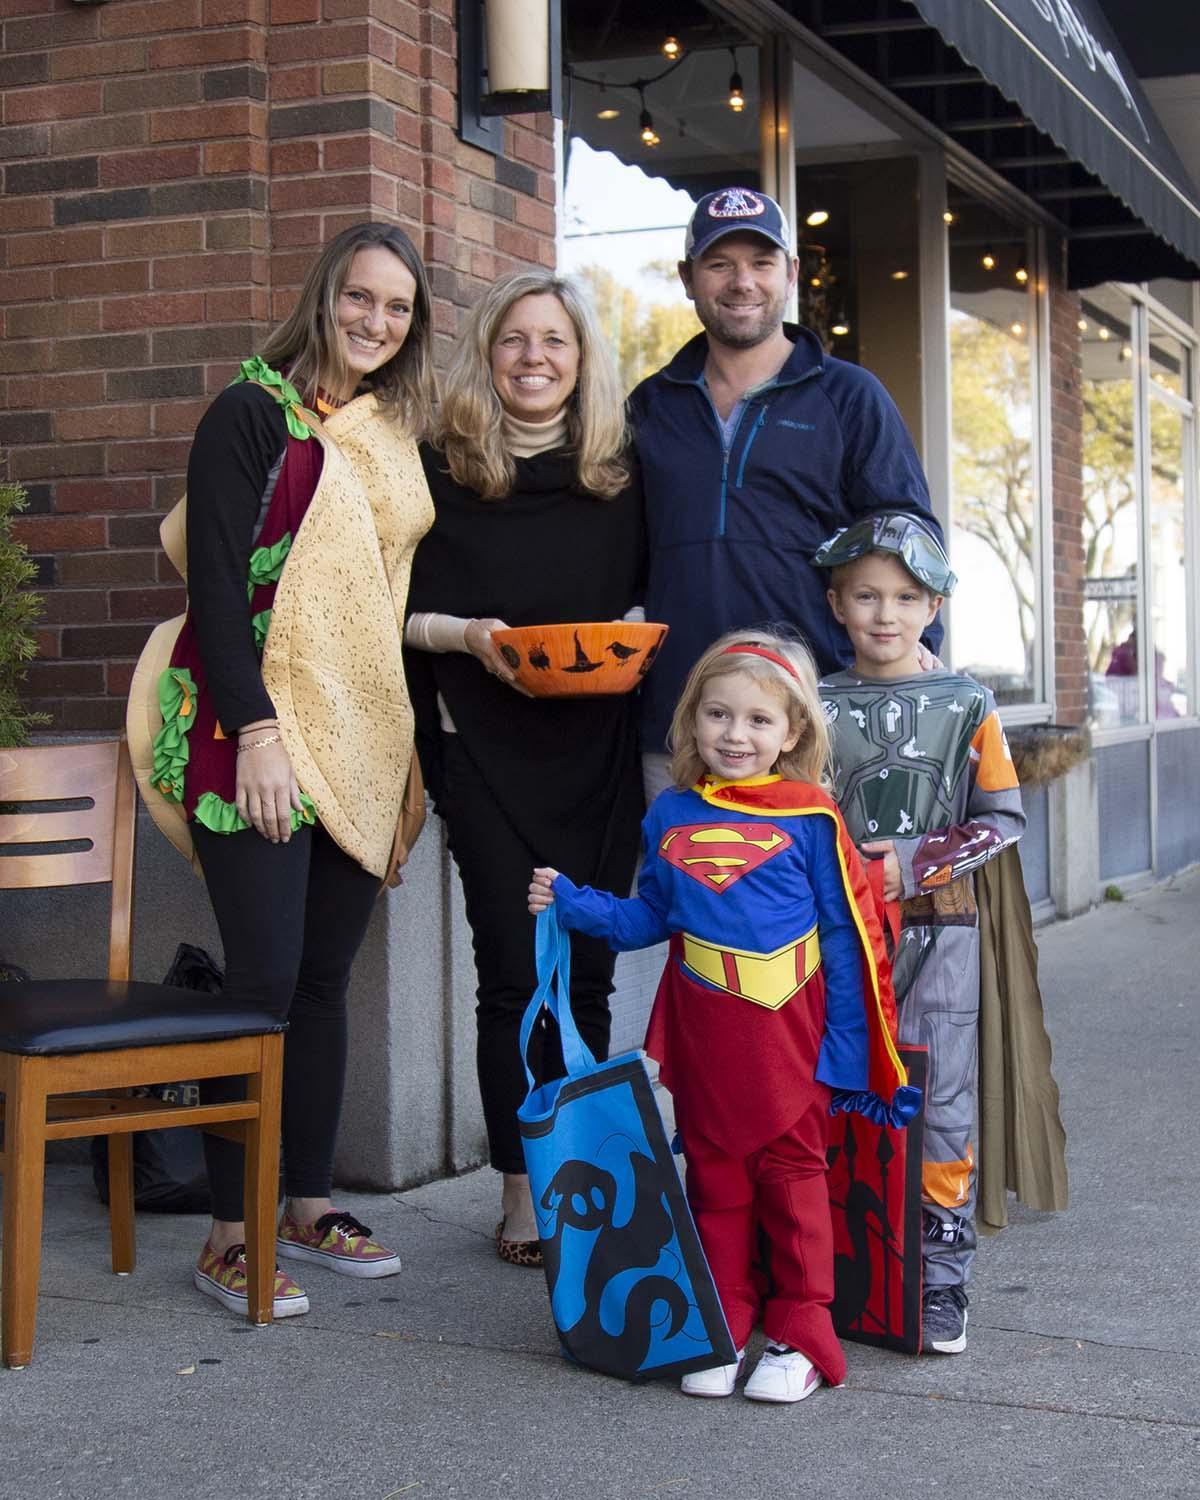 Trick or Treating in downtown St. Joseph.